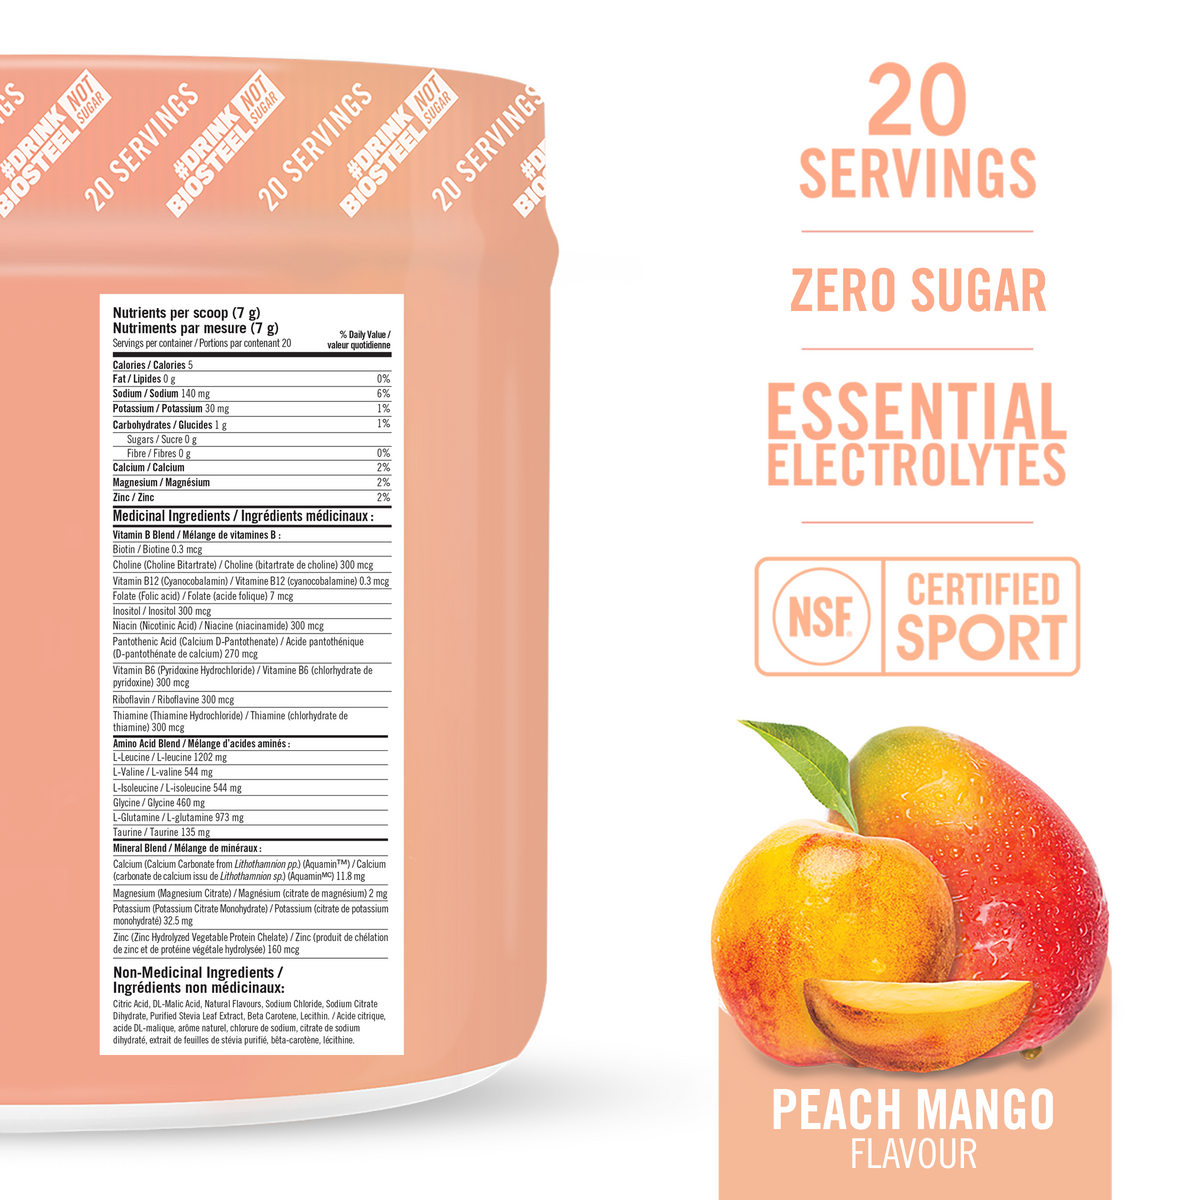 HYDRATION MIX / Peach Mango - 20 Servings - ProCare Outlet by BioSteel Sports Nutrition